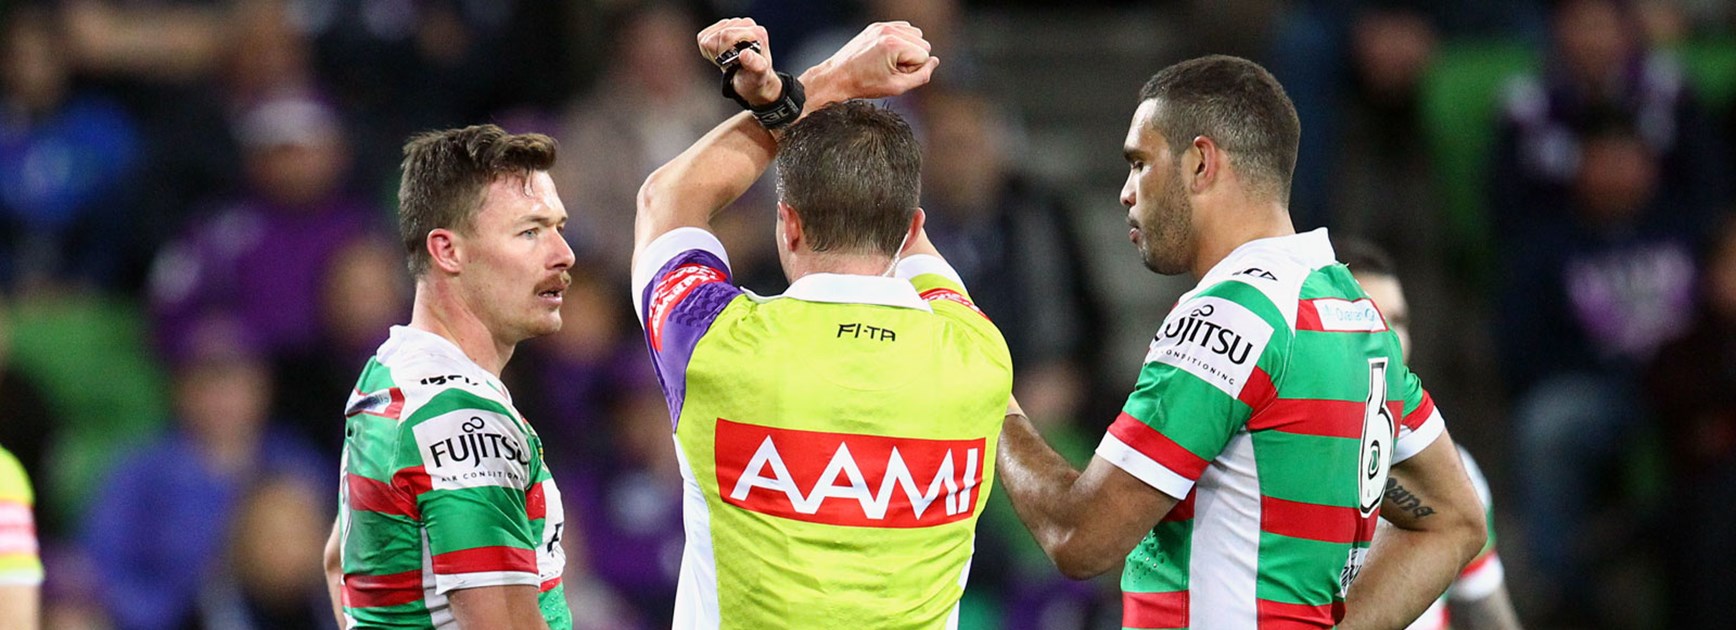 NRL players will face fines for minor offences under a new judiciary structure in 2017.